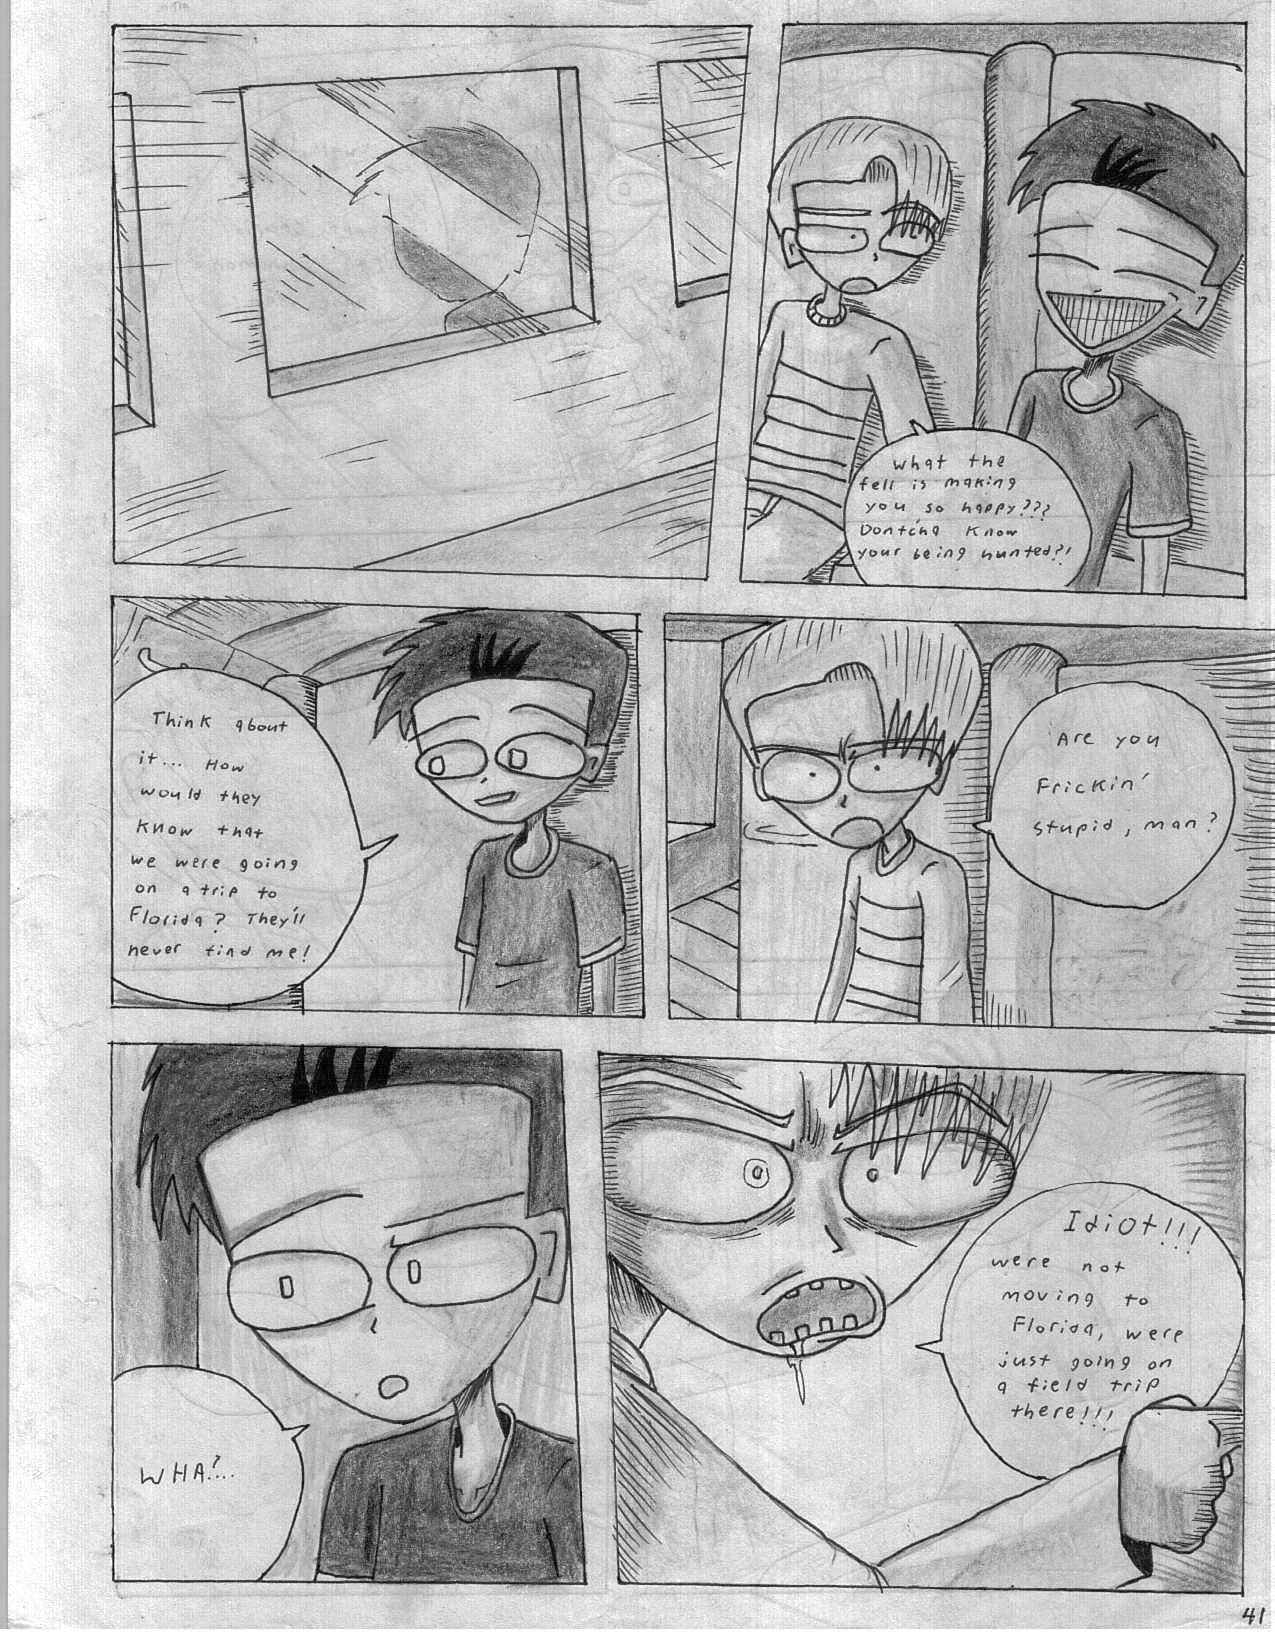 PMI Volume 1, page 41 by Walrus101